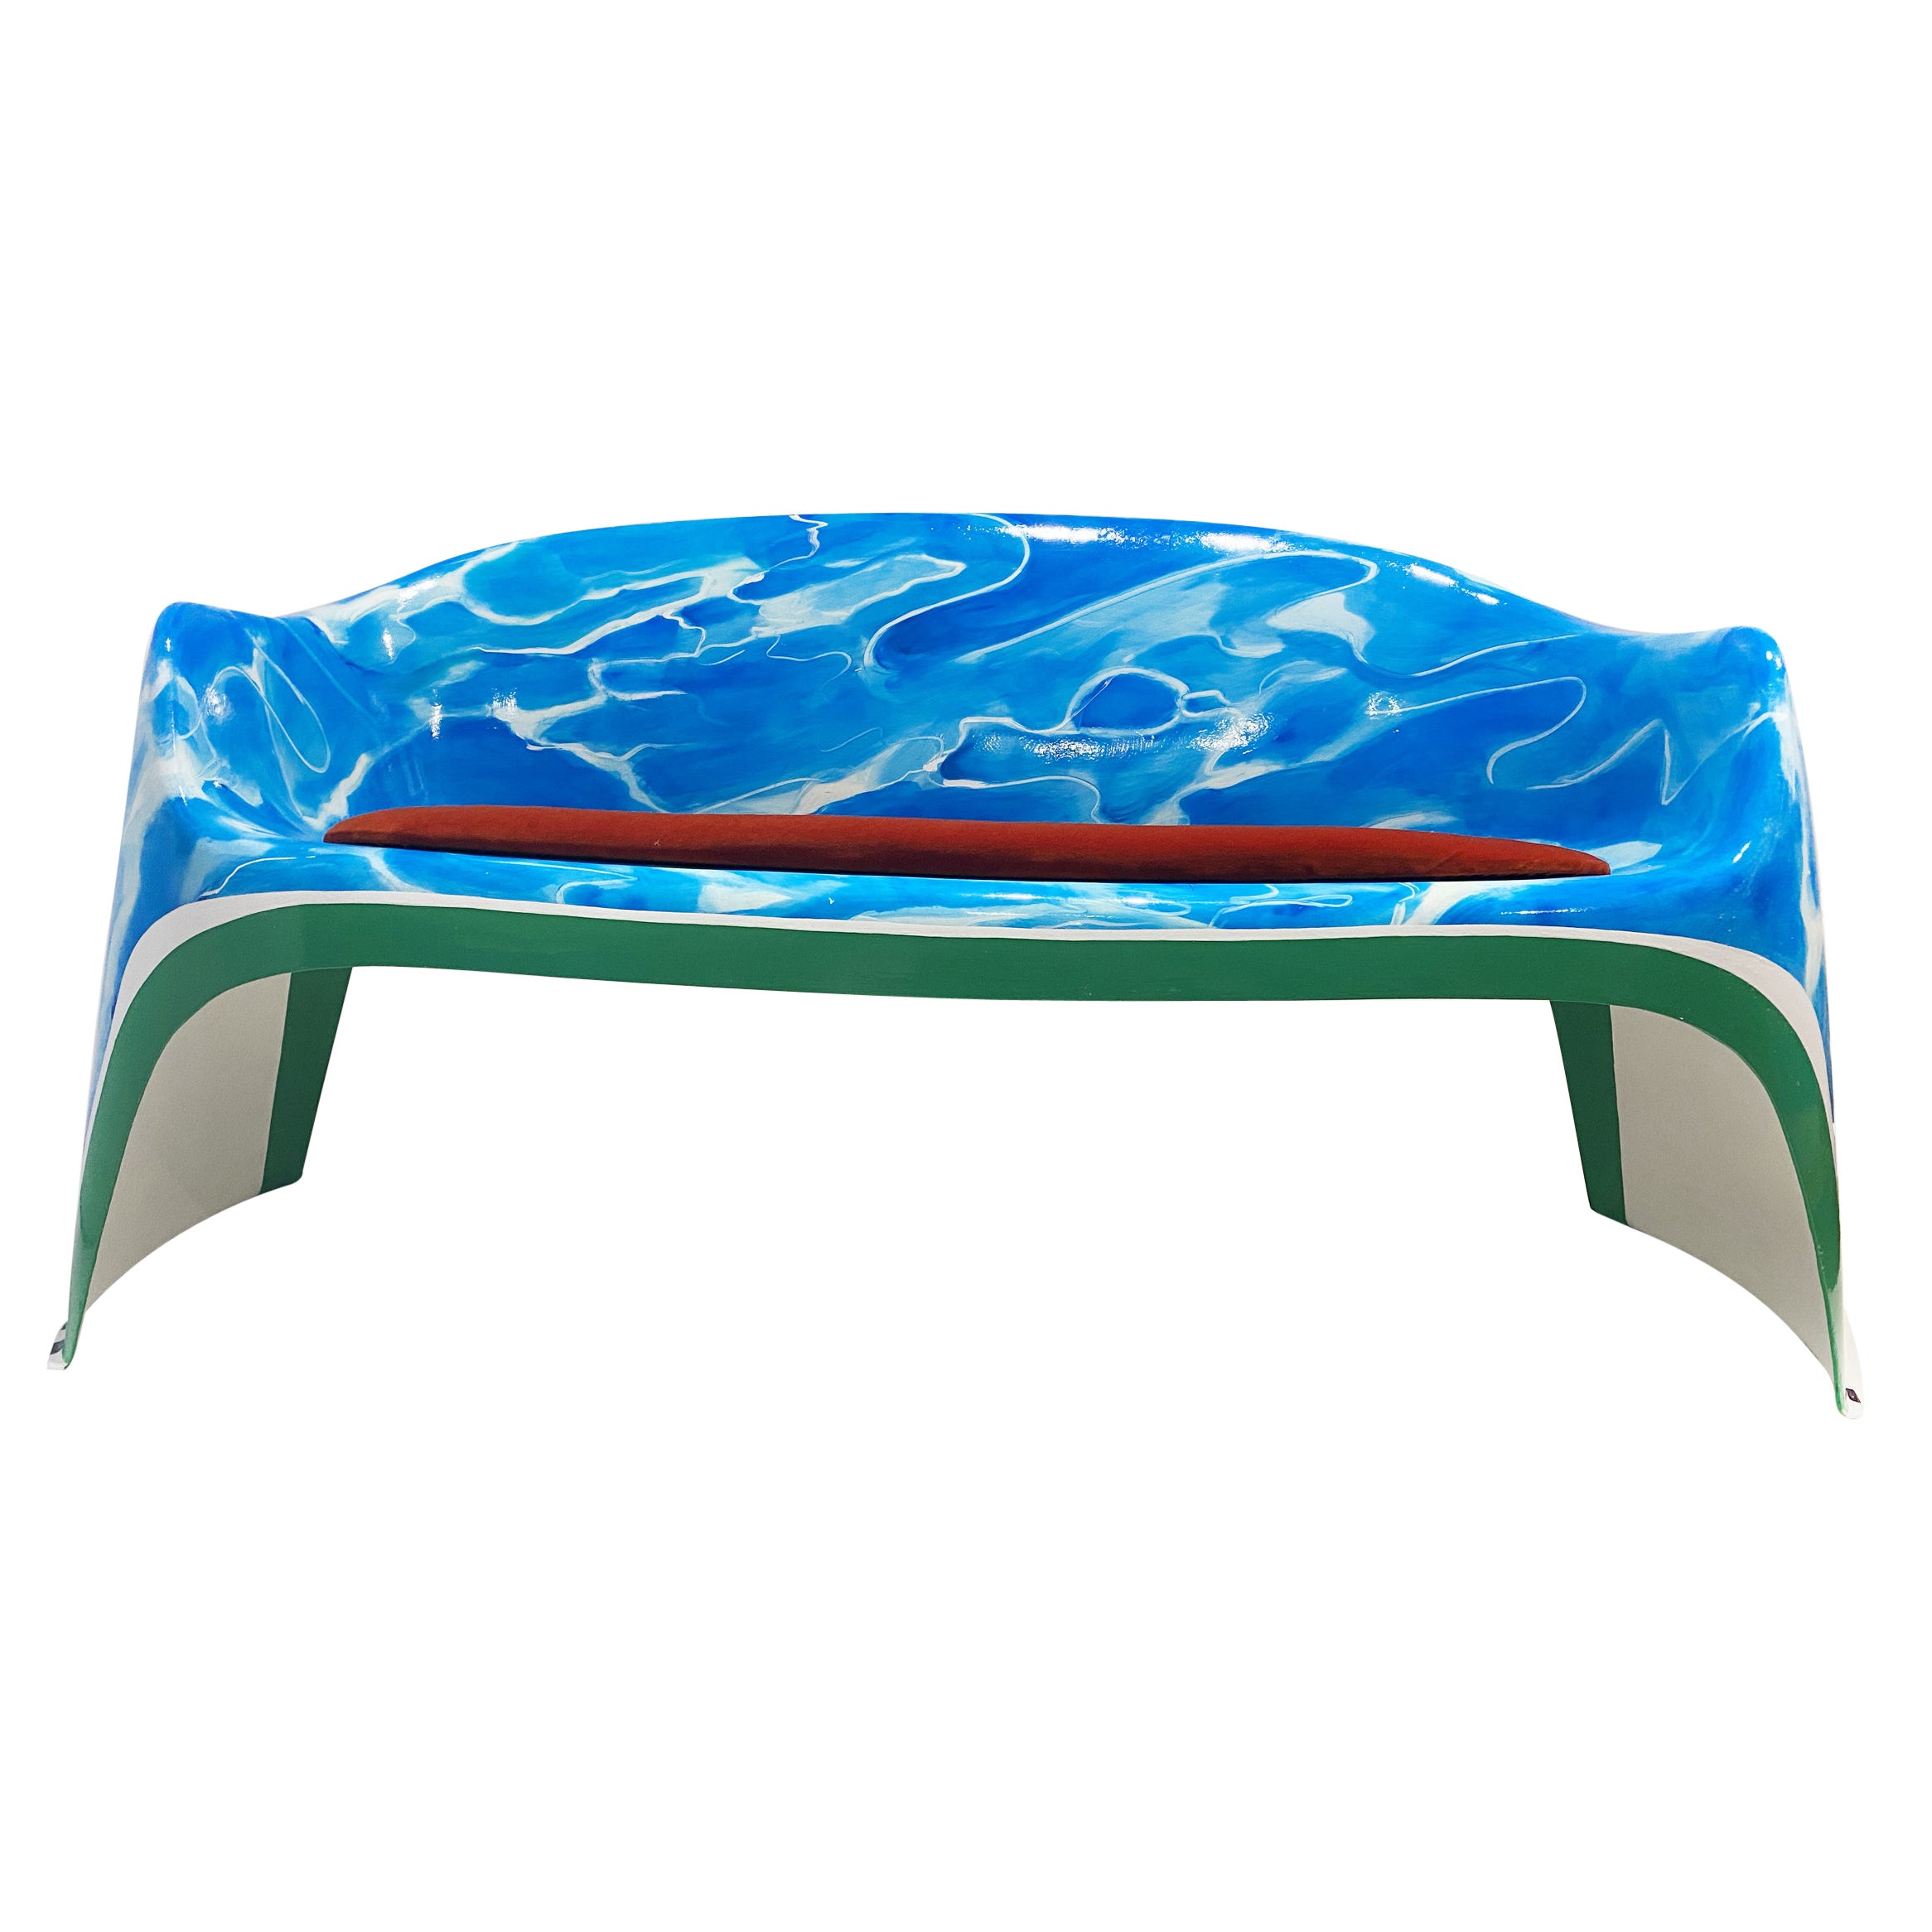 ELEMENT 00002 Swimming Bench 1 For Sale